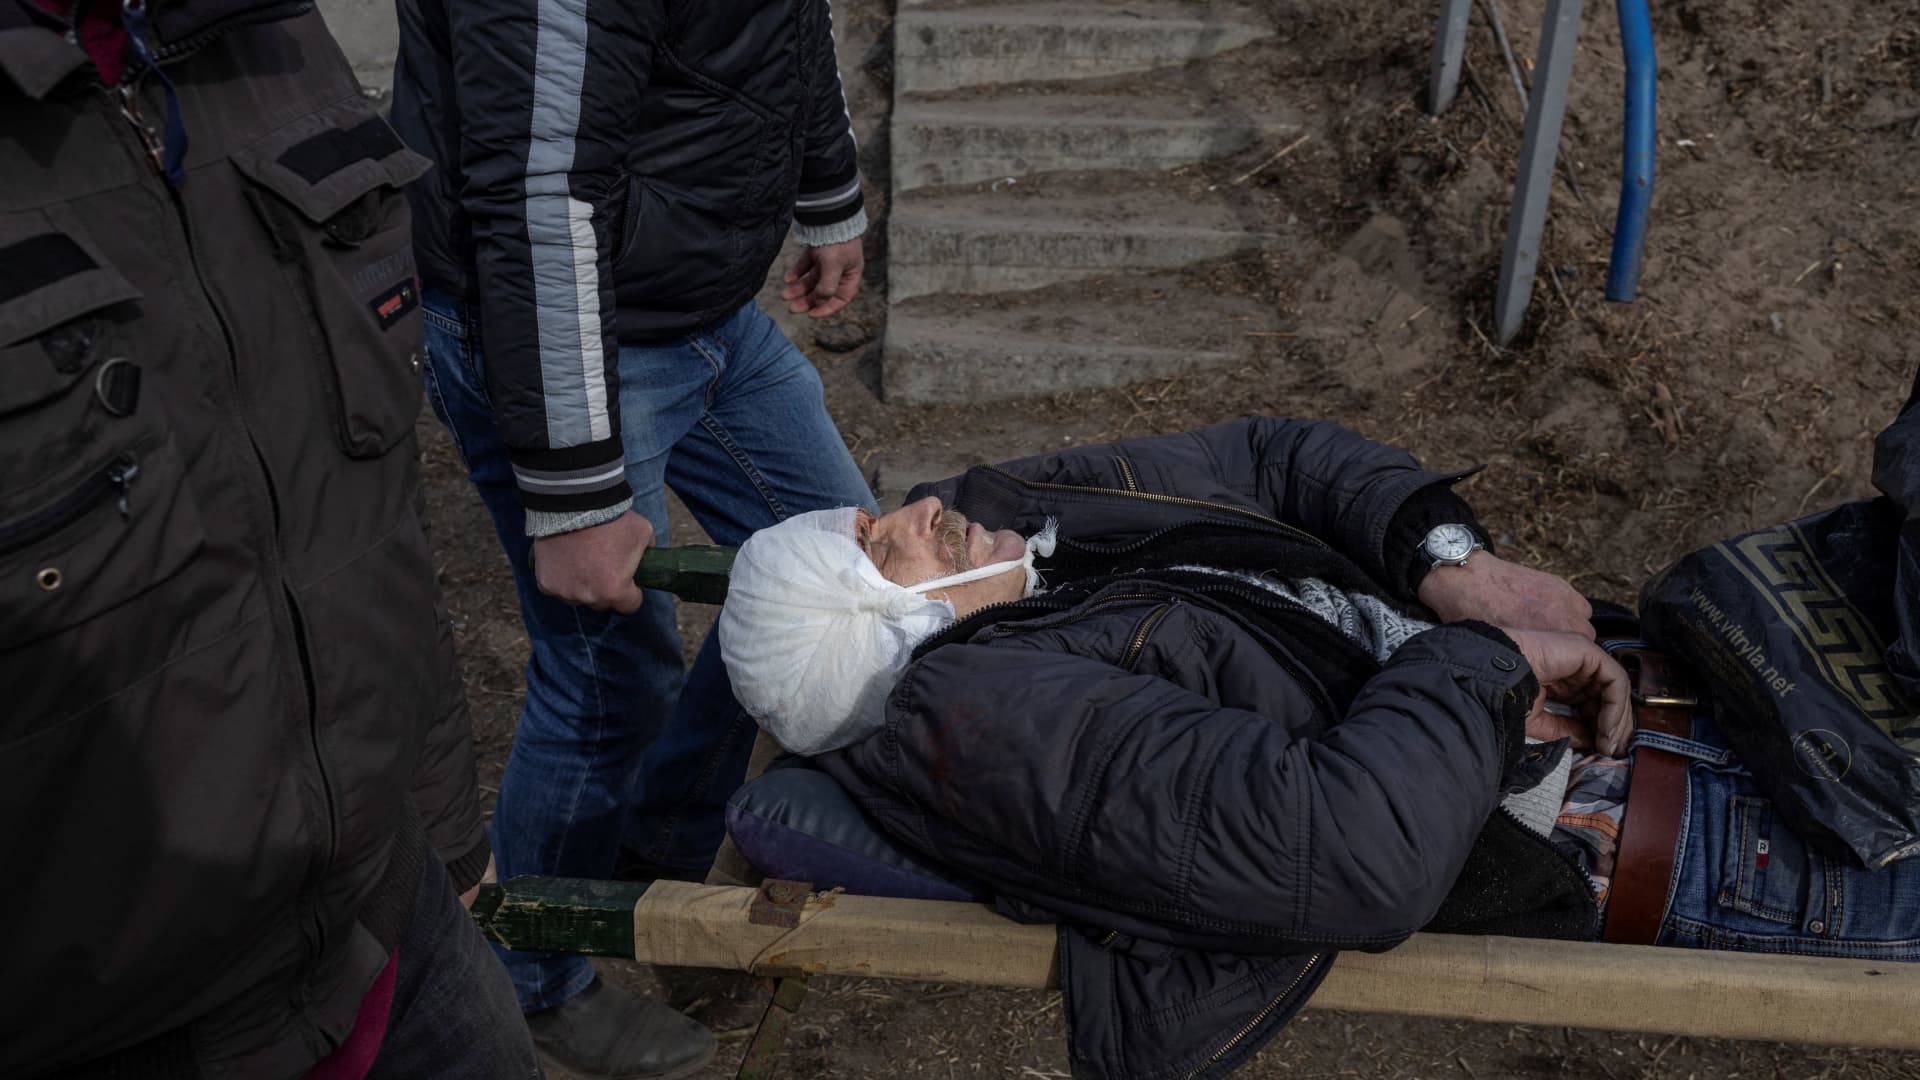 A wounded man is evacuated as Russia's invasion of Ukraine, in the town of Irpin outside Kyiv, Ukraine, March 12, 2022.